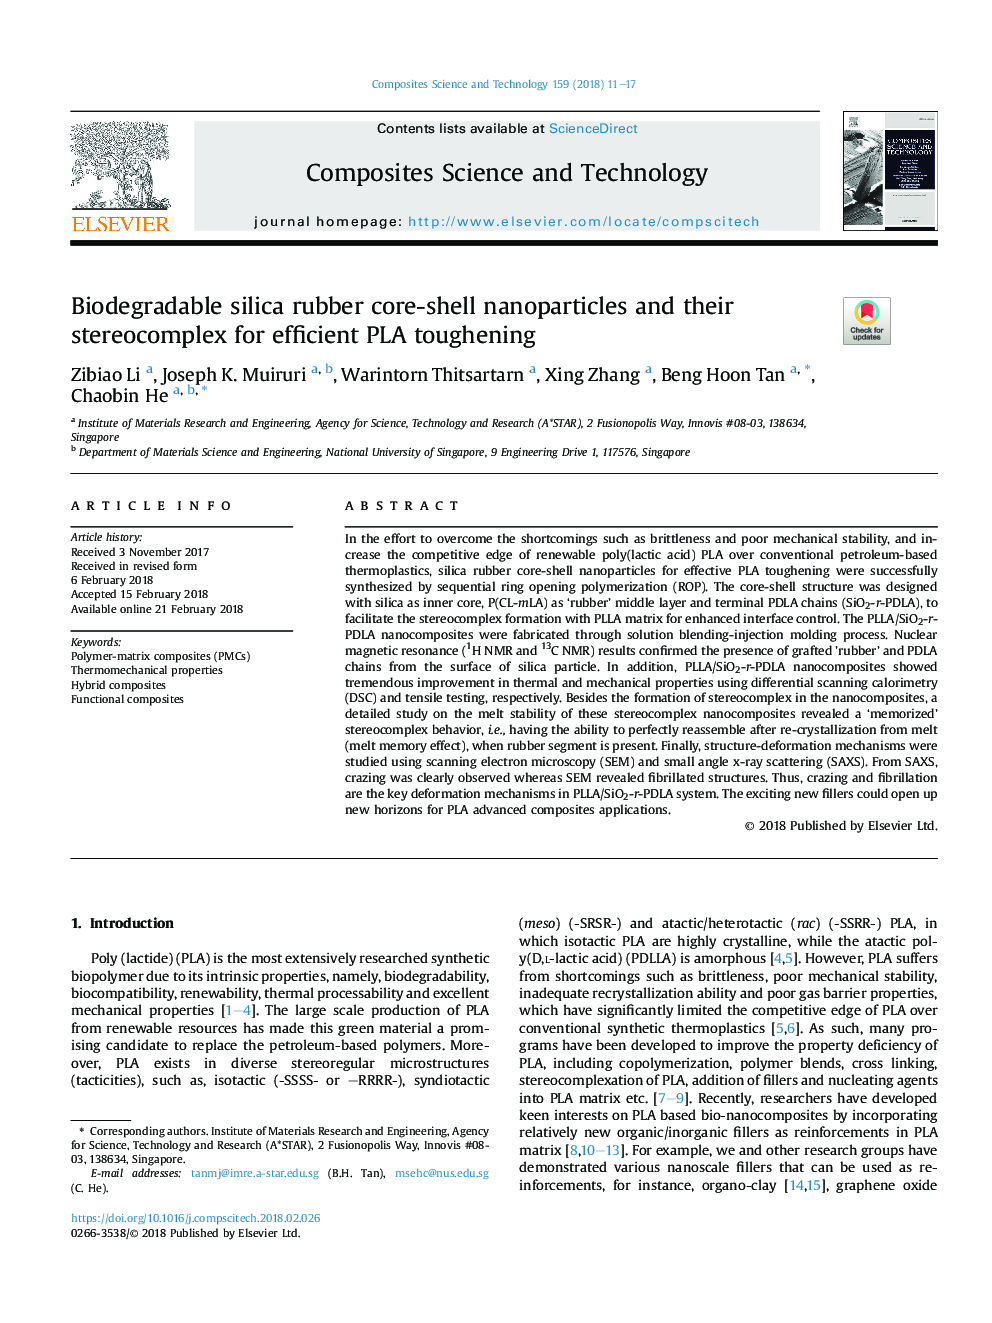 Biodegradable silica rubber core-shell nanoparticles and their stereocomplex for efficient PLA toughening